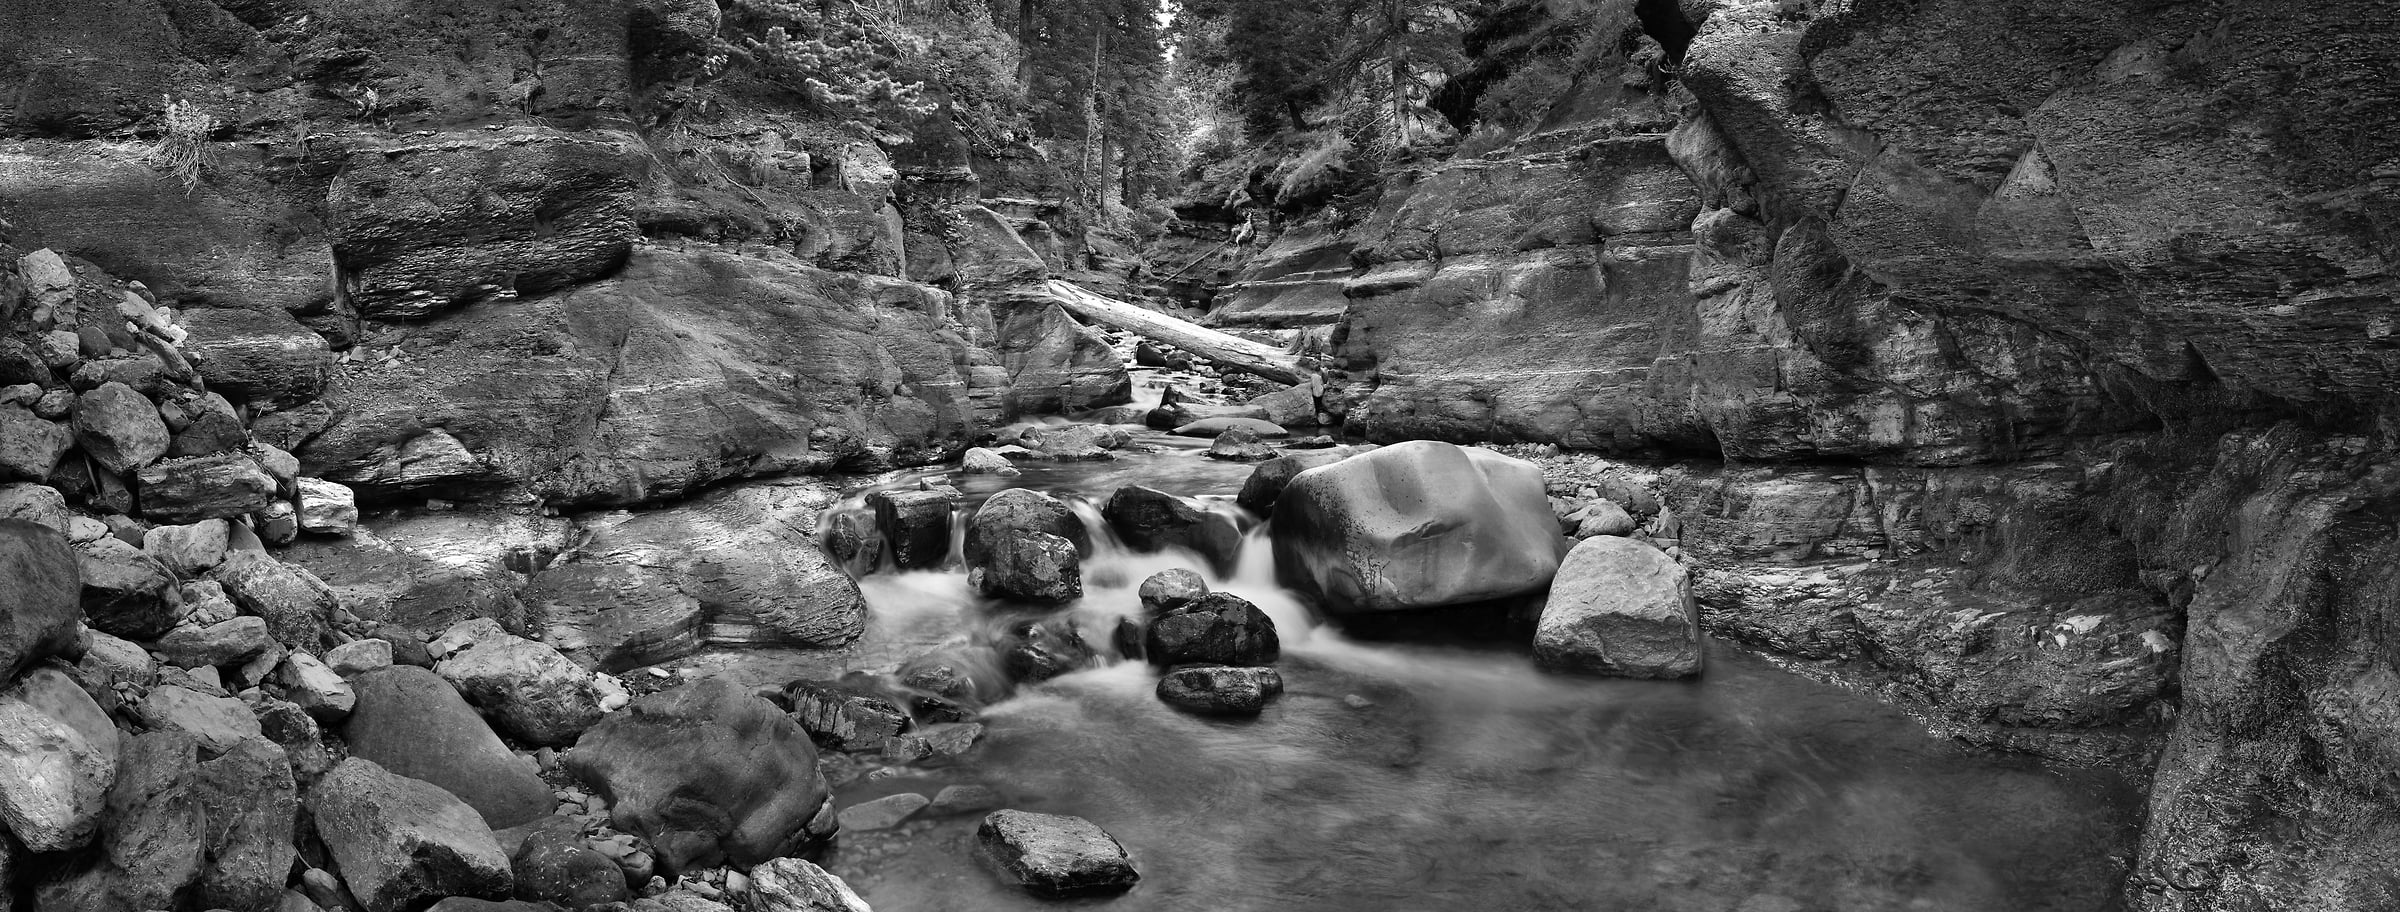 4,741 megapixels! A very high resolution, large-format VAST photo print of a stream, waterfall, and rocks; black and white fine art nature photo created by Steve Webster in Red Rock Canyon, Waterton Lakes National Park, Alberta Canada.